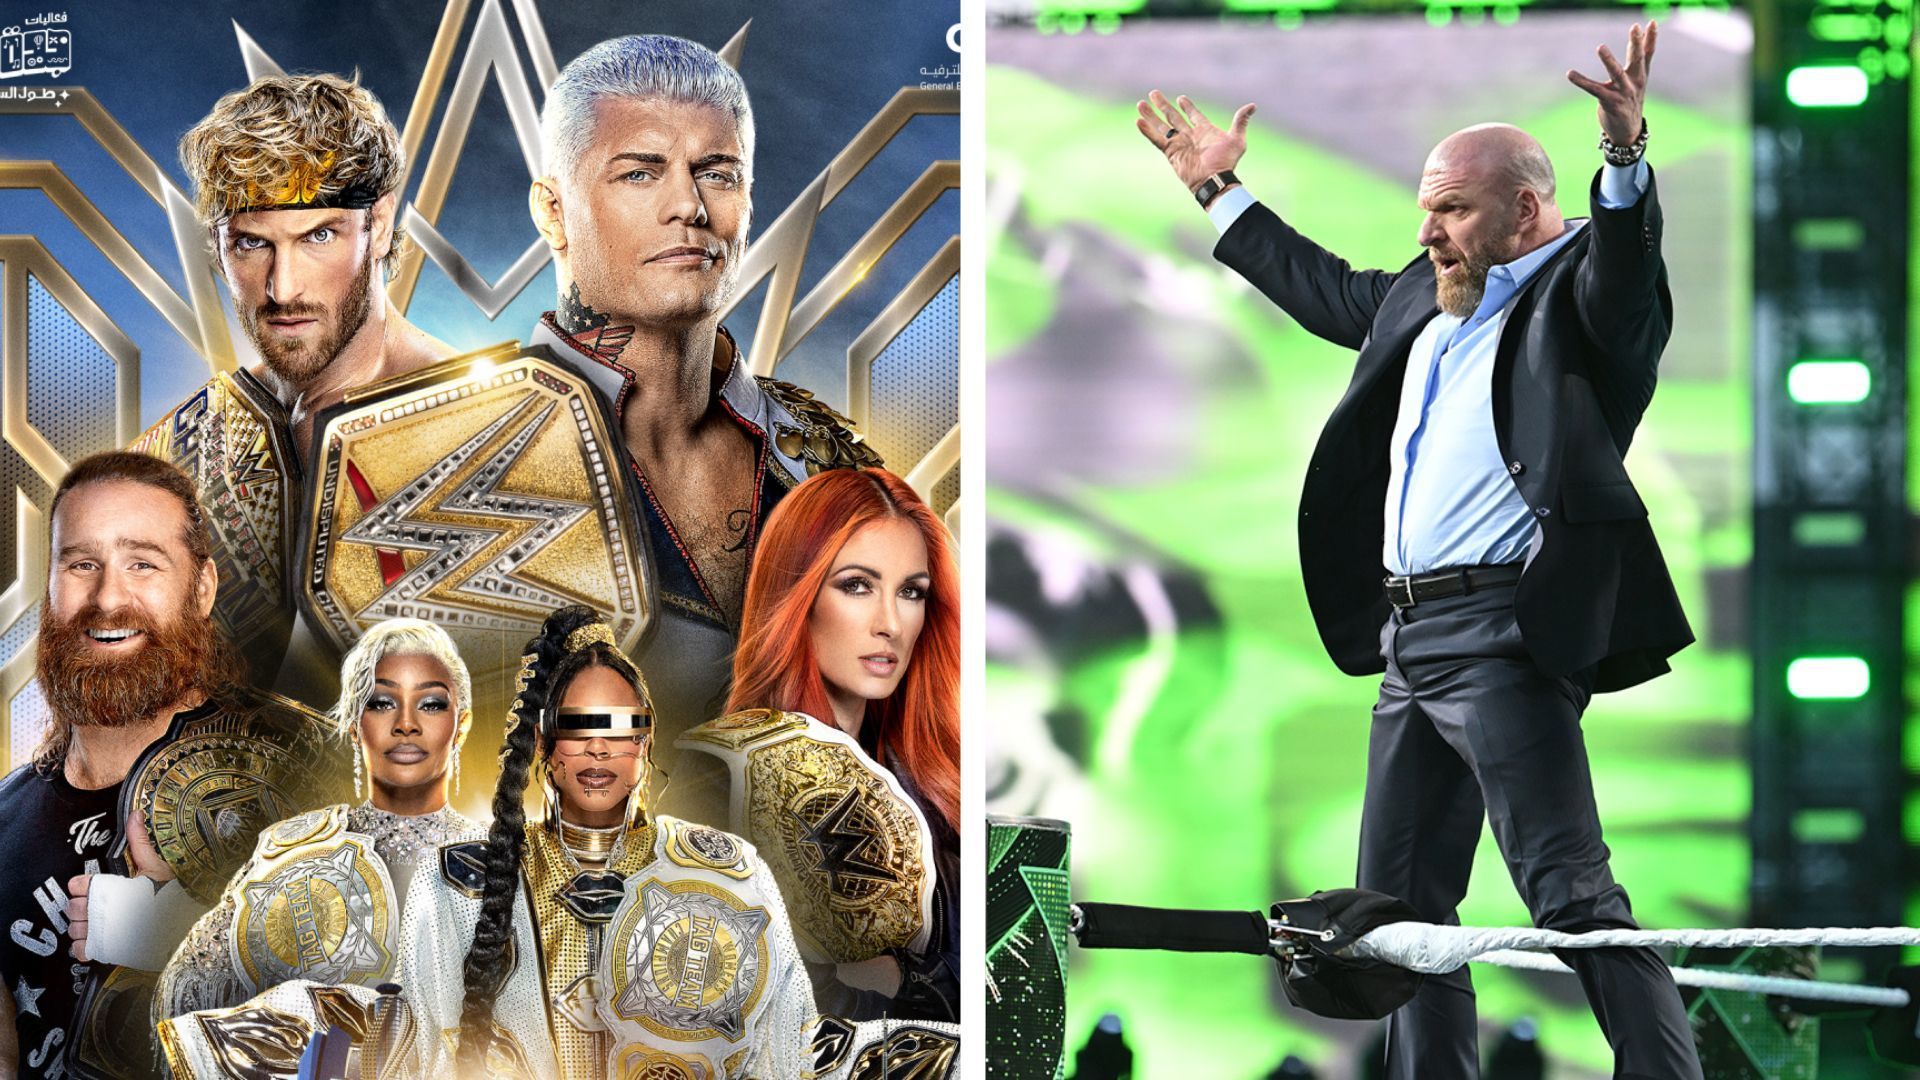 Triple H could have some WWE stars make a splash this weekend